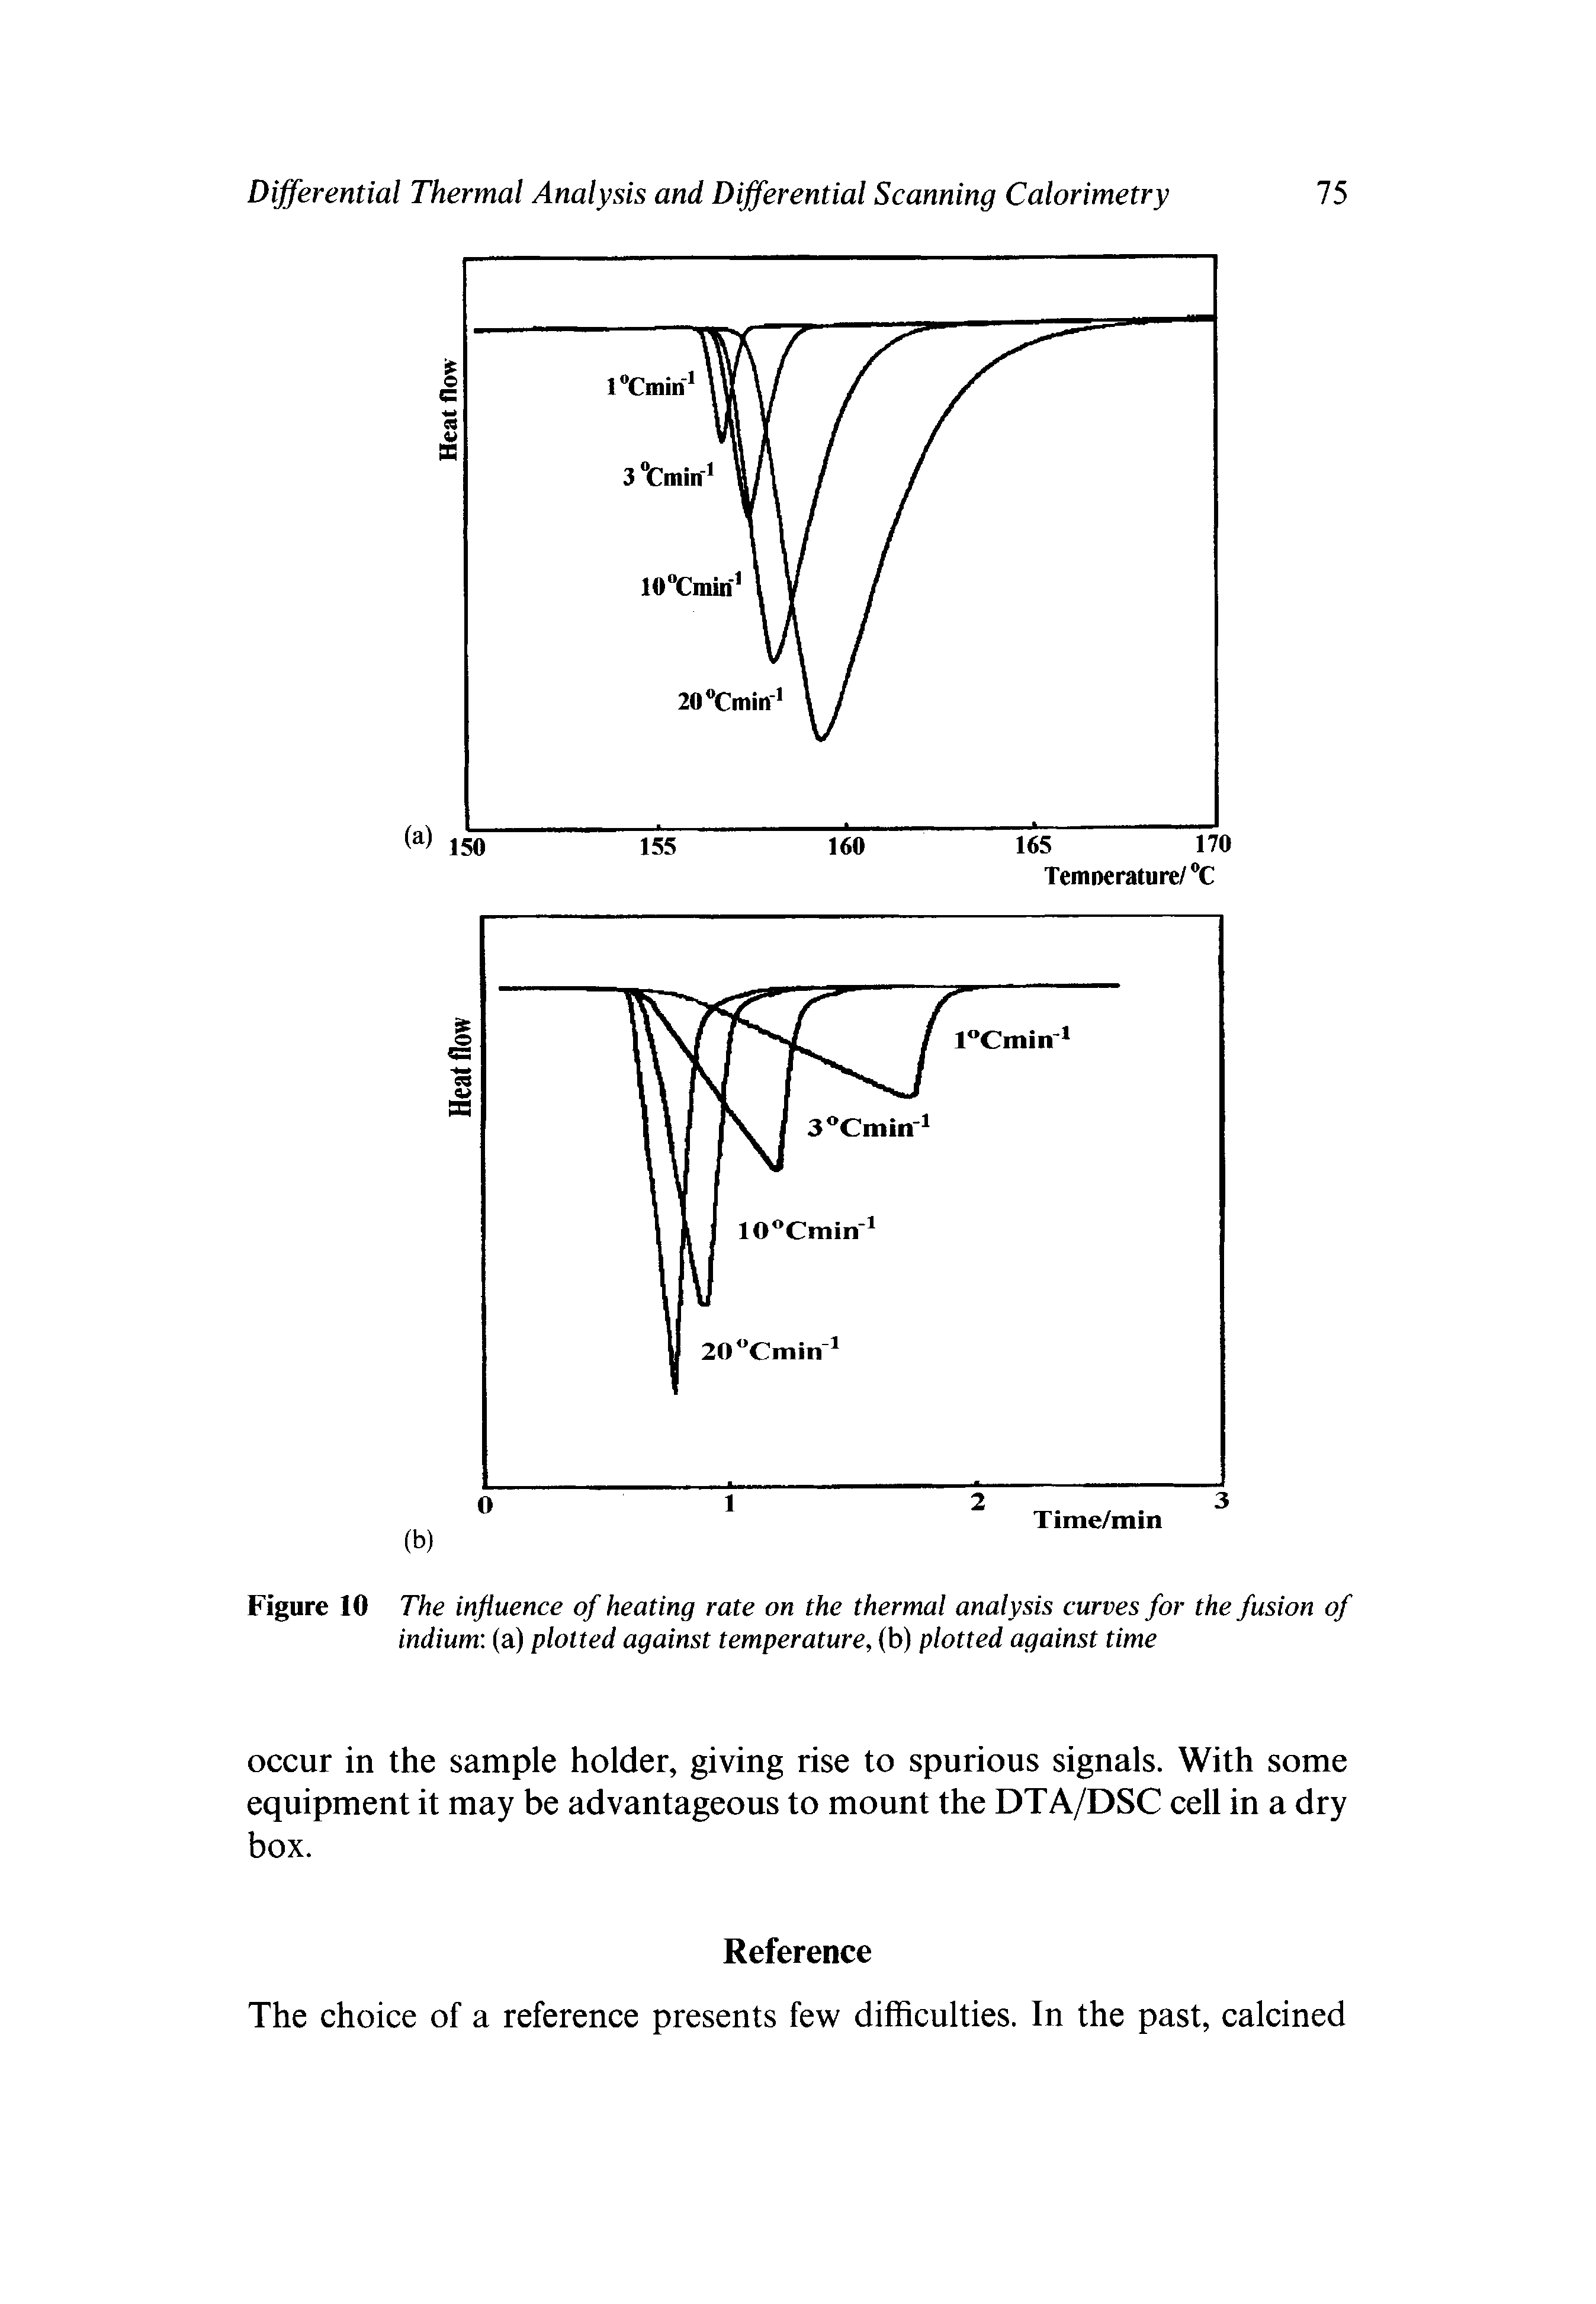 Figure 10 The influence of heating rate on the thermal analysis curves for the fusion of indium (a) plotted against temperature, (b) plotted against time...